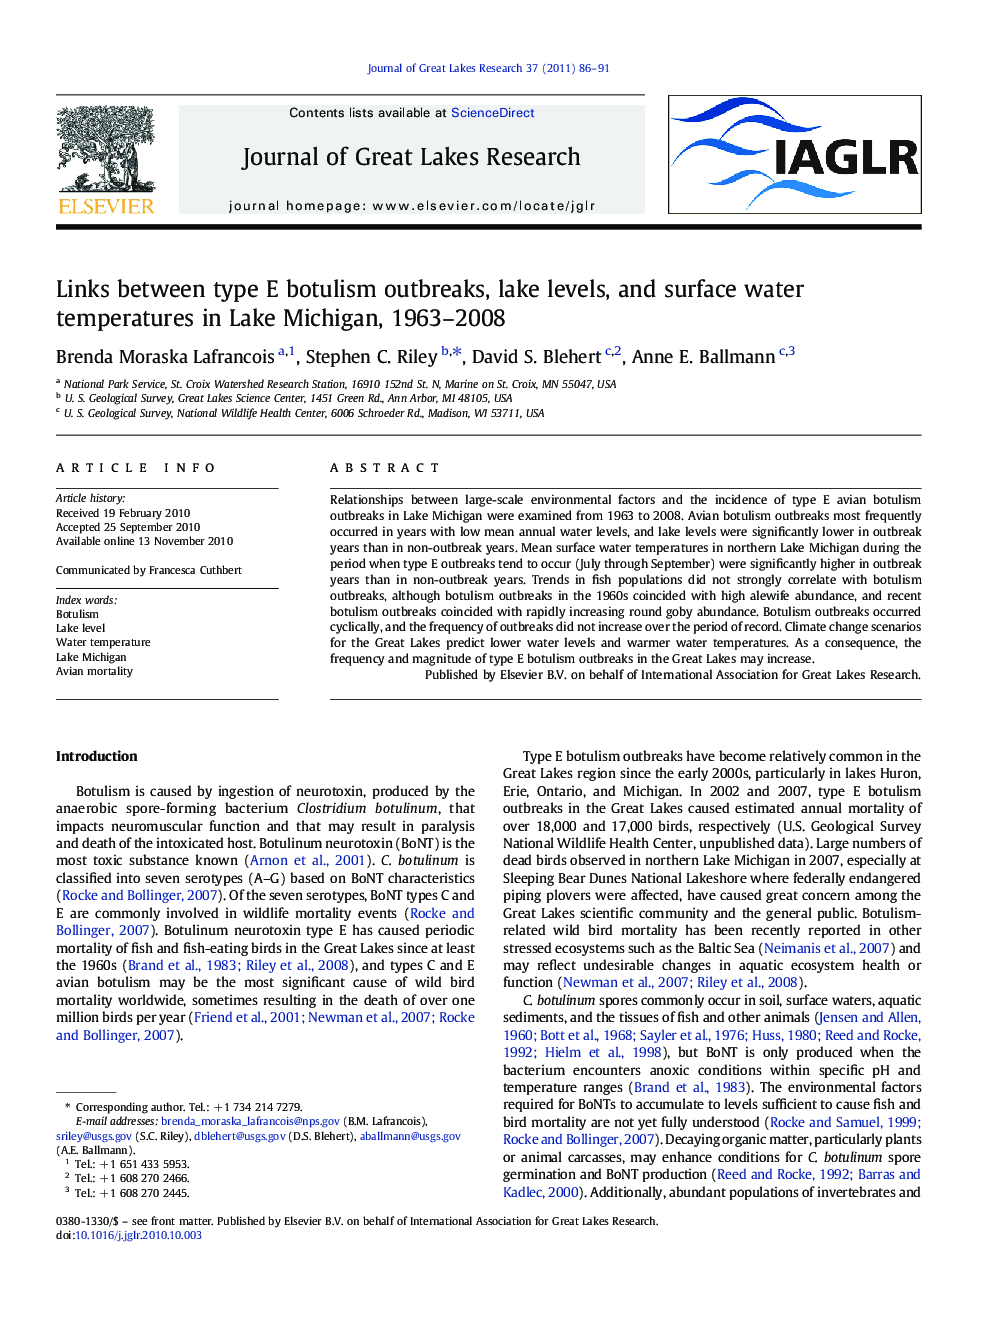 Links between type E botulism outbreaks, lake levels, and surface water temperatures in Lake Michigan, 1963-2008